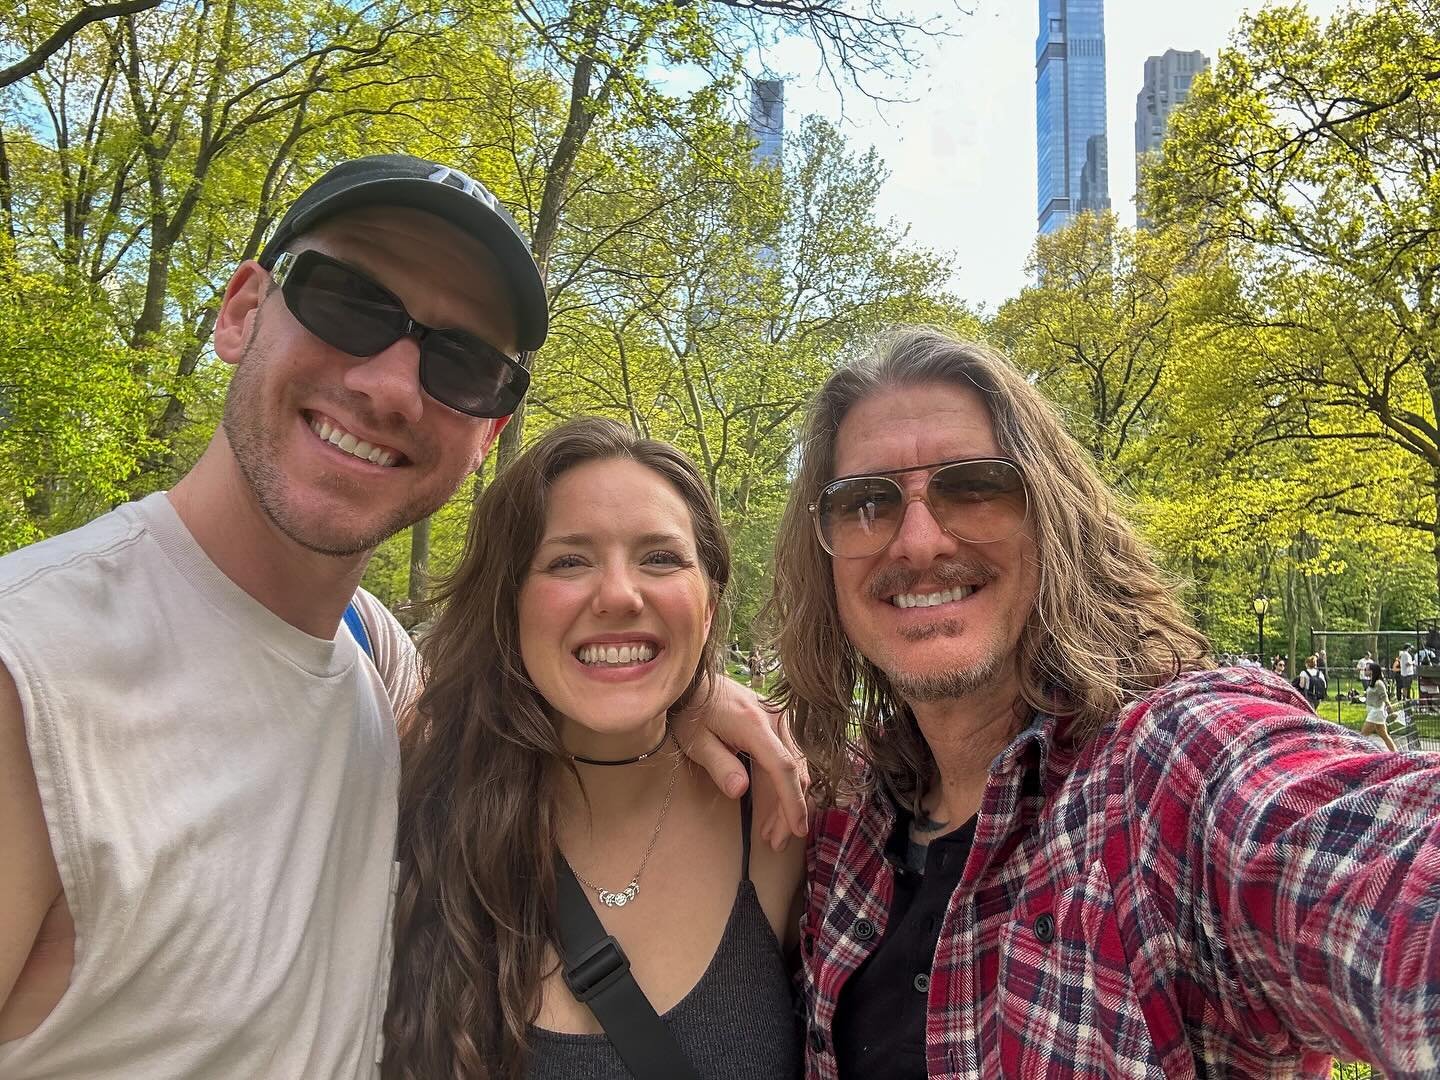 THANK YOU TO OUR TOUR GUIDE
A special shoutout to Jessica Gray&rsquo;s good friends from high school days, KYLE, who lives in New York. He took a day just to give us the one day spectacular tour of the city of New York! In just one day we experienced